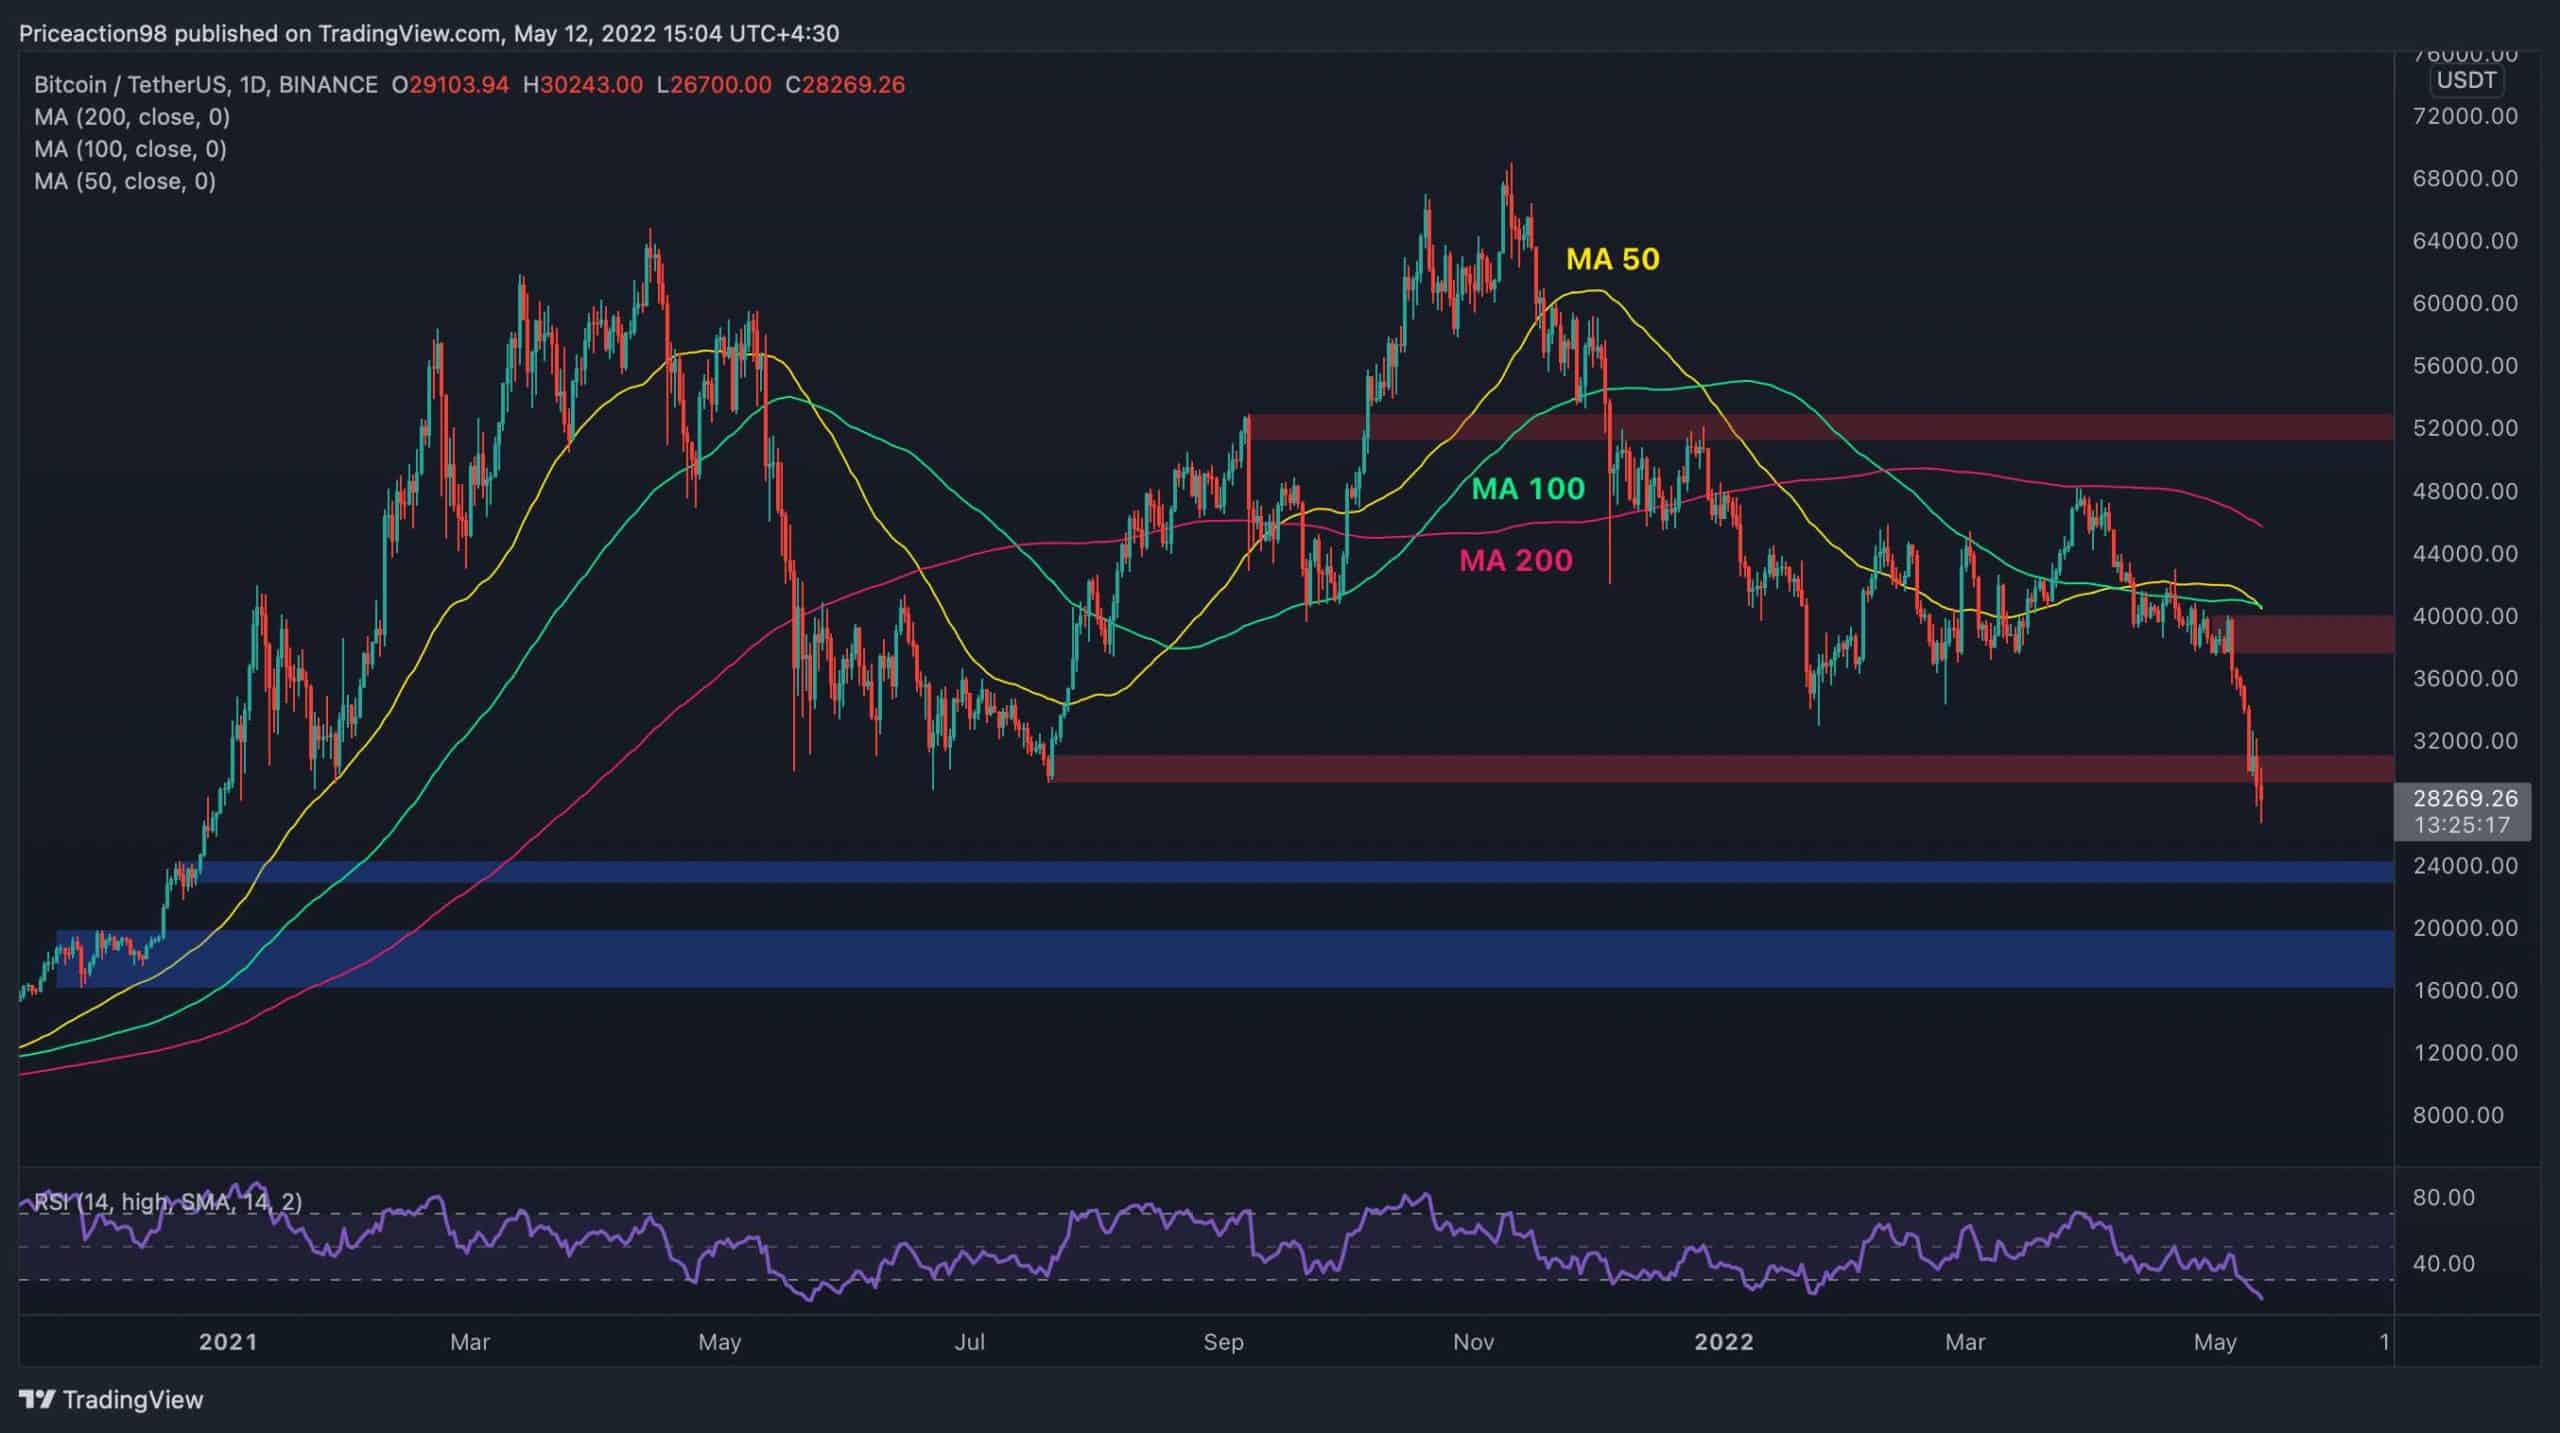 Bitcoin-breaks-down-to-dec-20-lows,-here-are-the-critical-levels-to-watch-(btc-price-analysis)